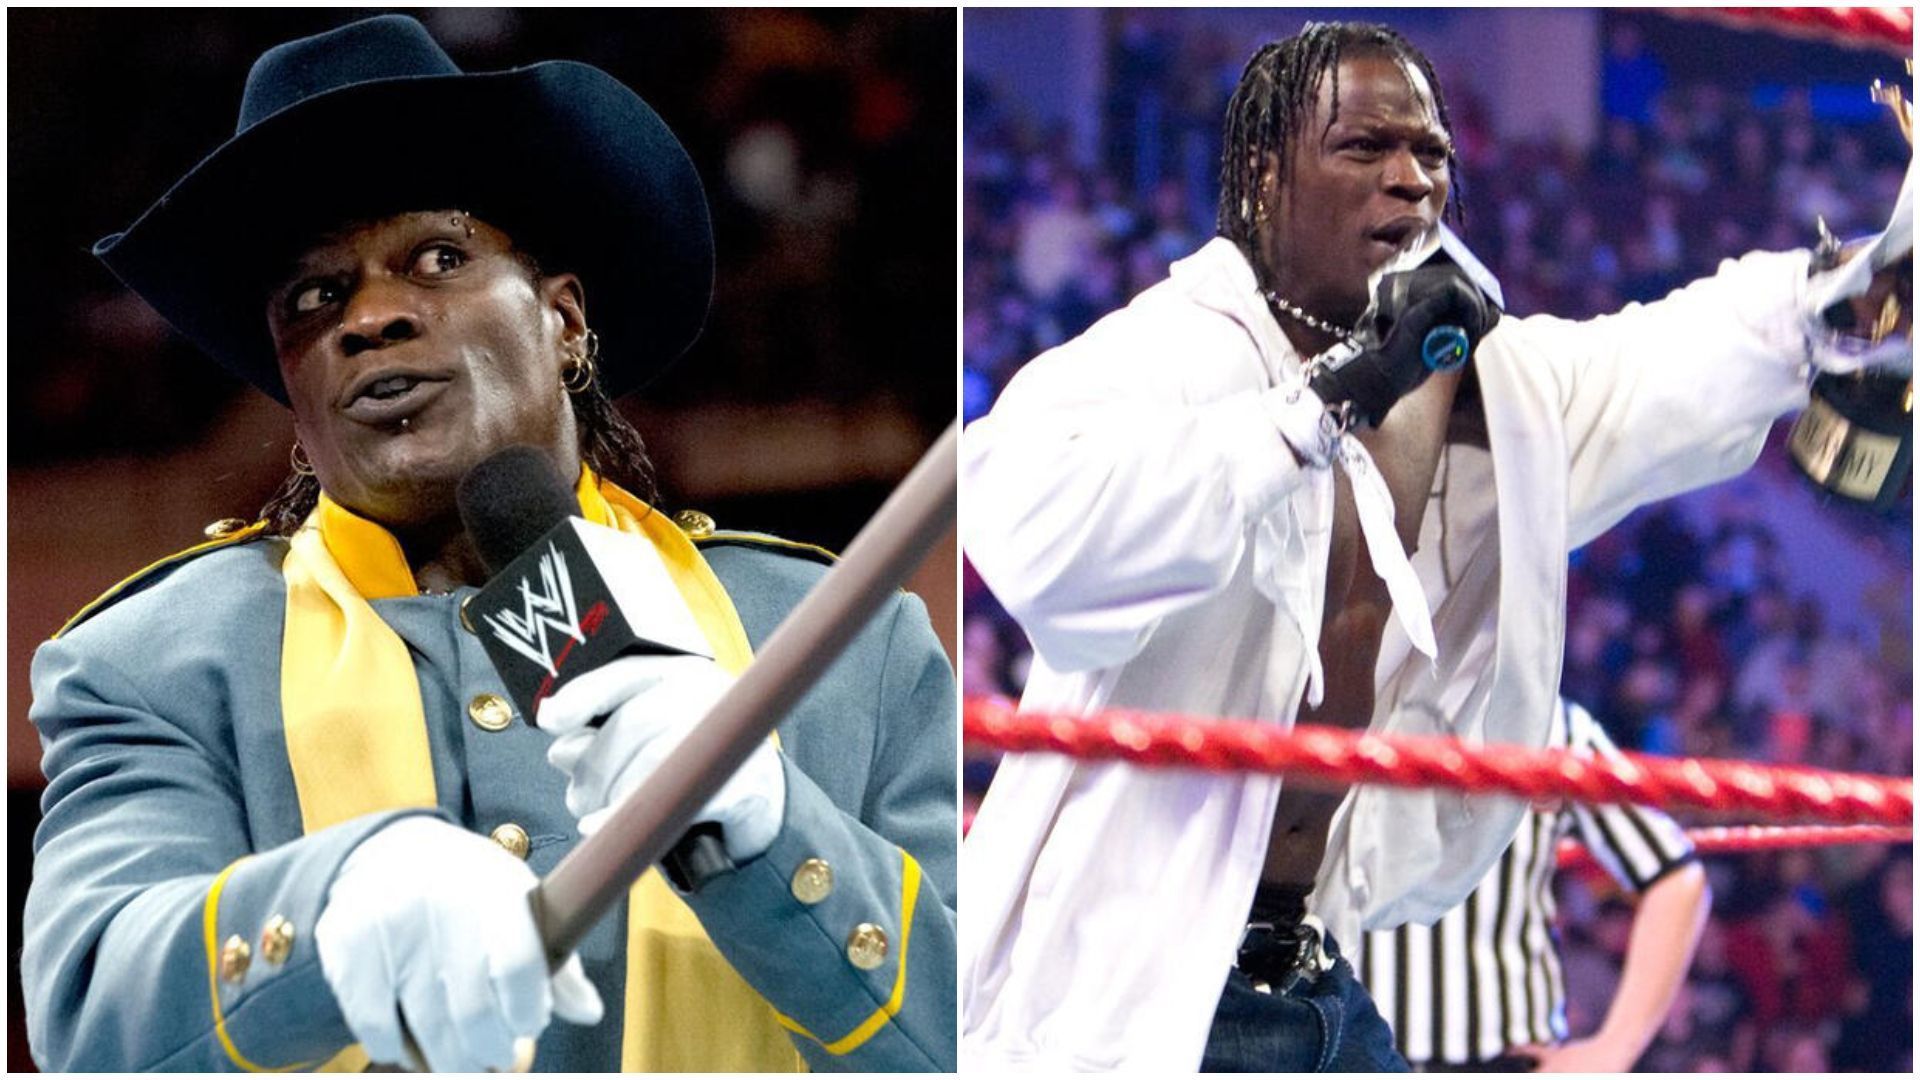 R-Truth is the current WWE World Tag Team Champion. (Image source: WWE.com)